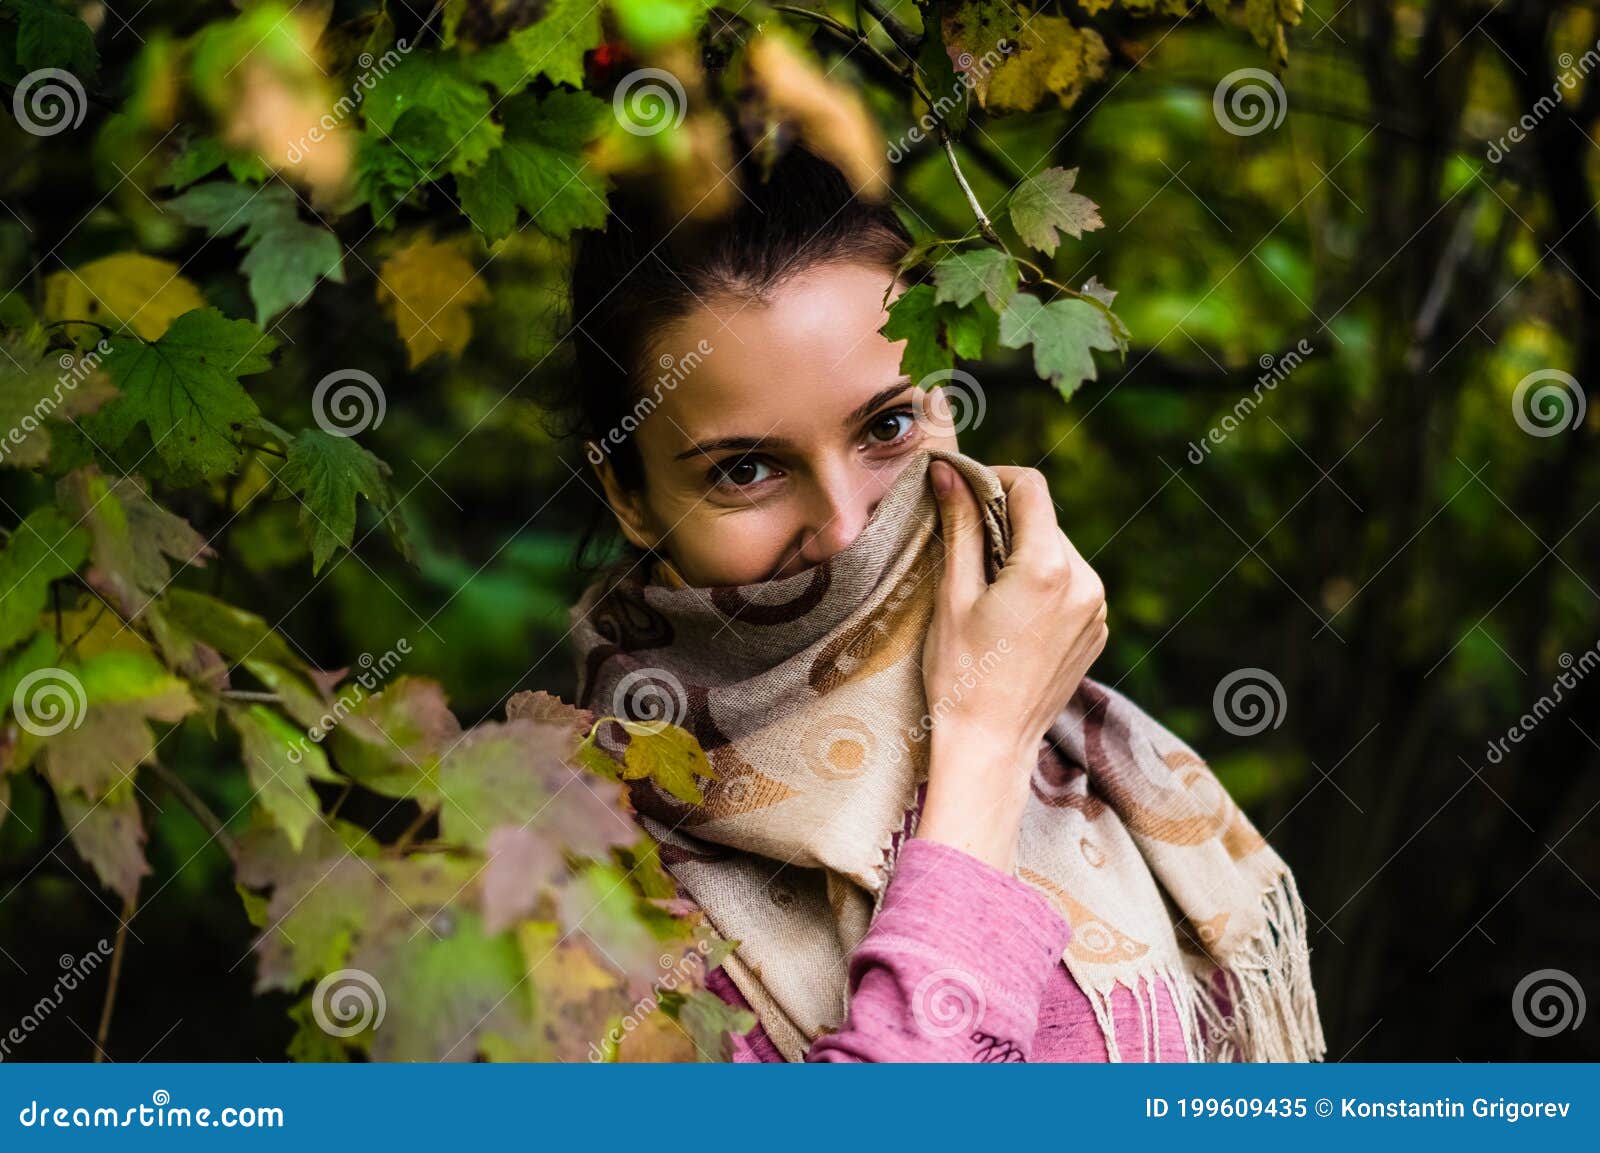 Beautiful Young Girl Portrait in Autumn Park. Woman Hide Her Face in ...